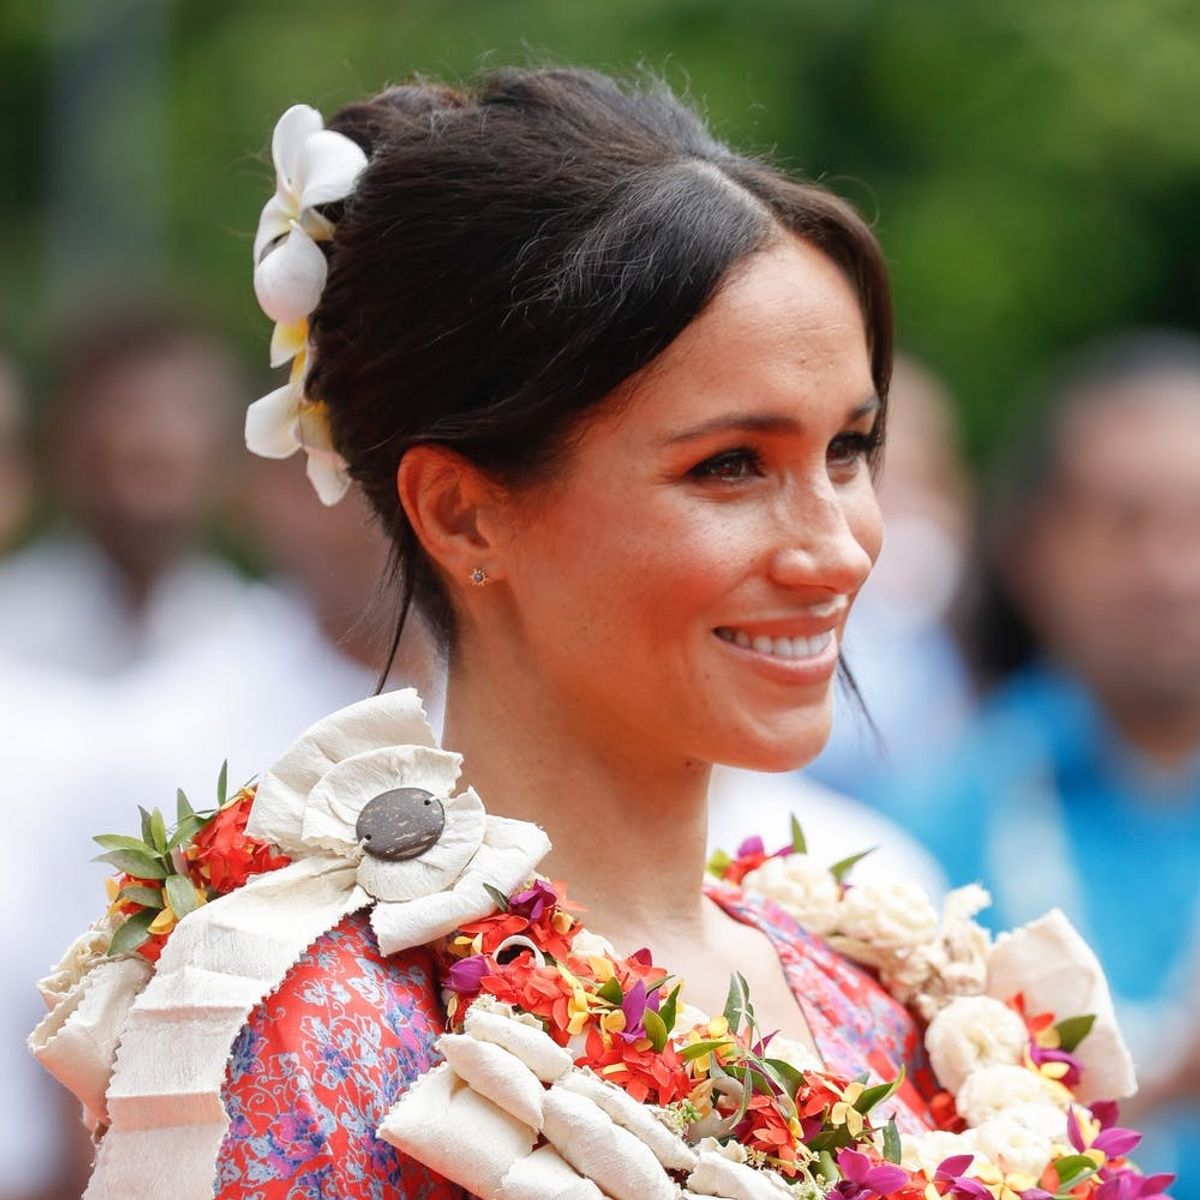 Meghan Markle Finally Switched Up Her Hairstyle to This Retro ‘Do